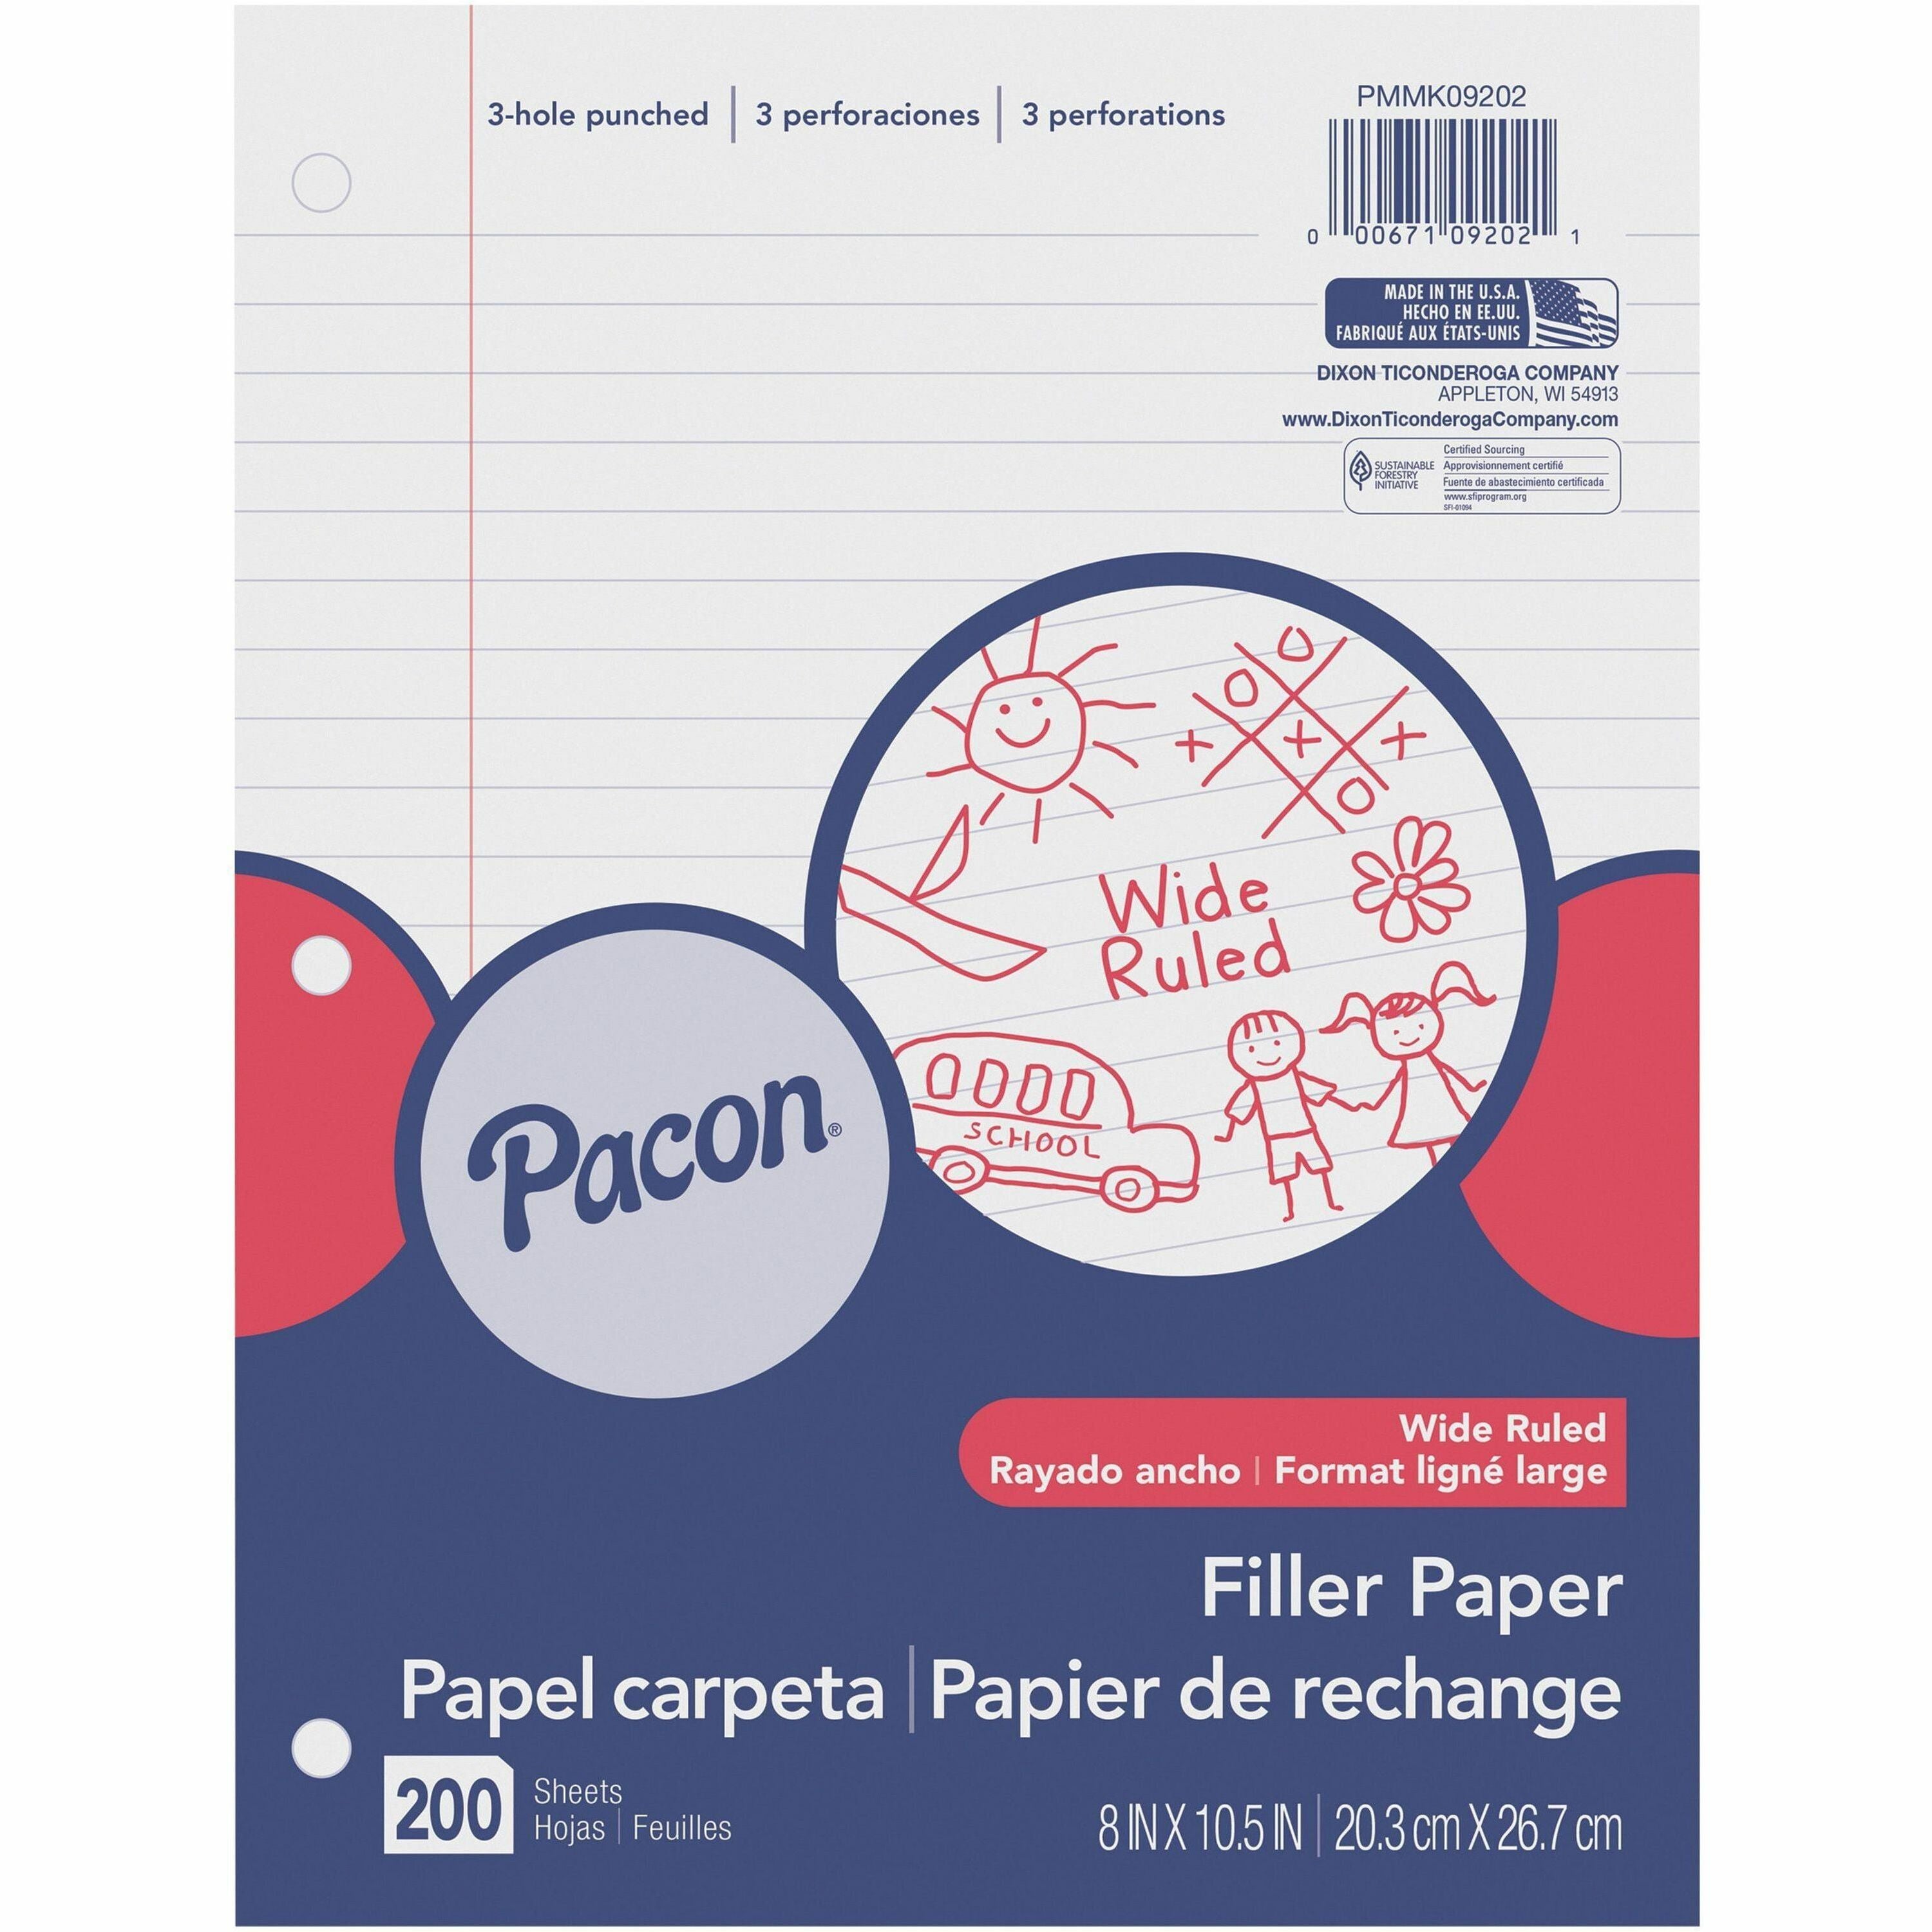 Pacon Wide Ruled Filler Paper - 200 Sheets - Wide Ruled - 0.38" Ruled - Red Margin - 3 Hole(s) - 8" x 10 1/2" - White Paper - Smooth, Punched - 200 / Pack - 